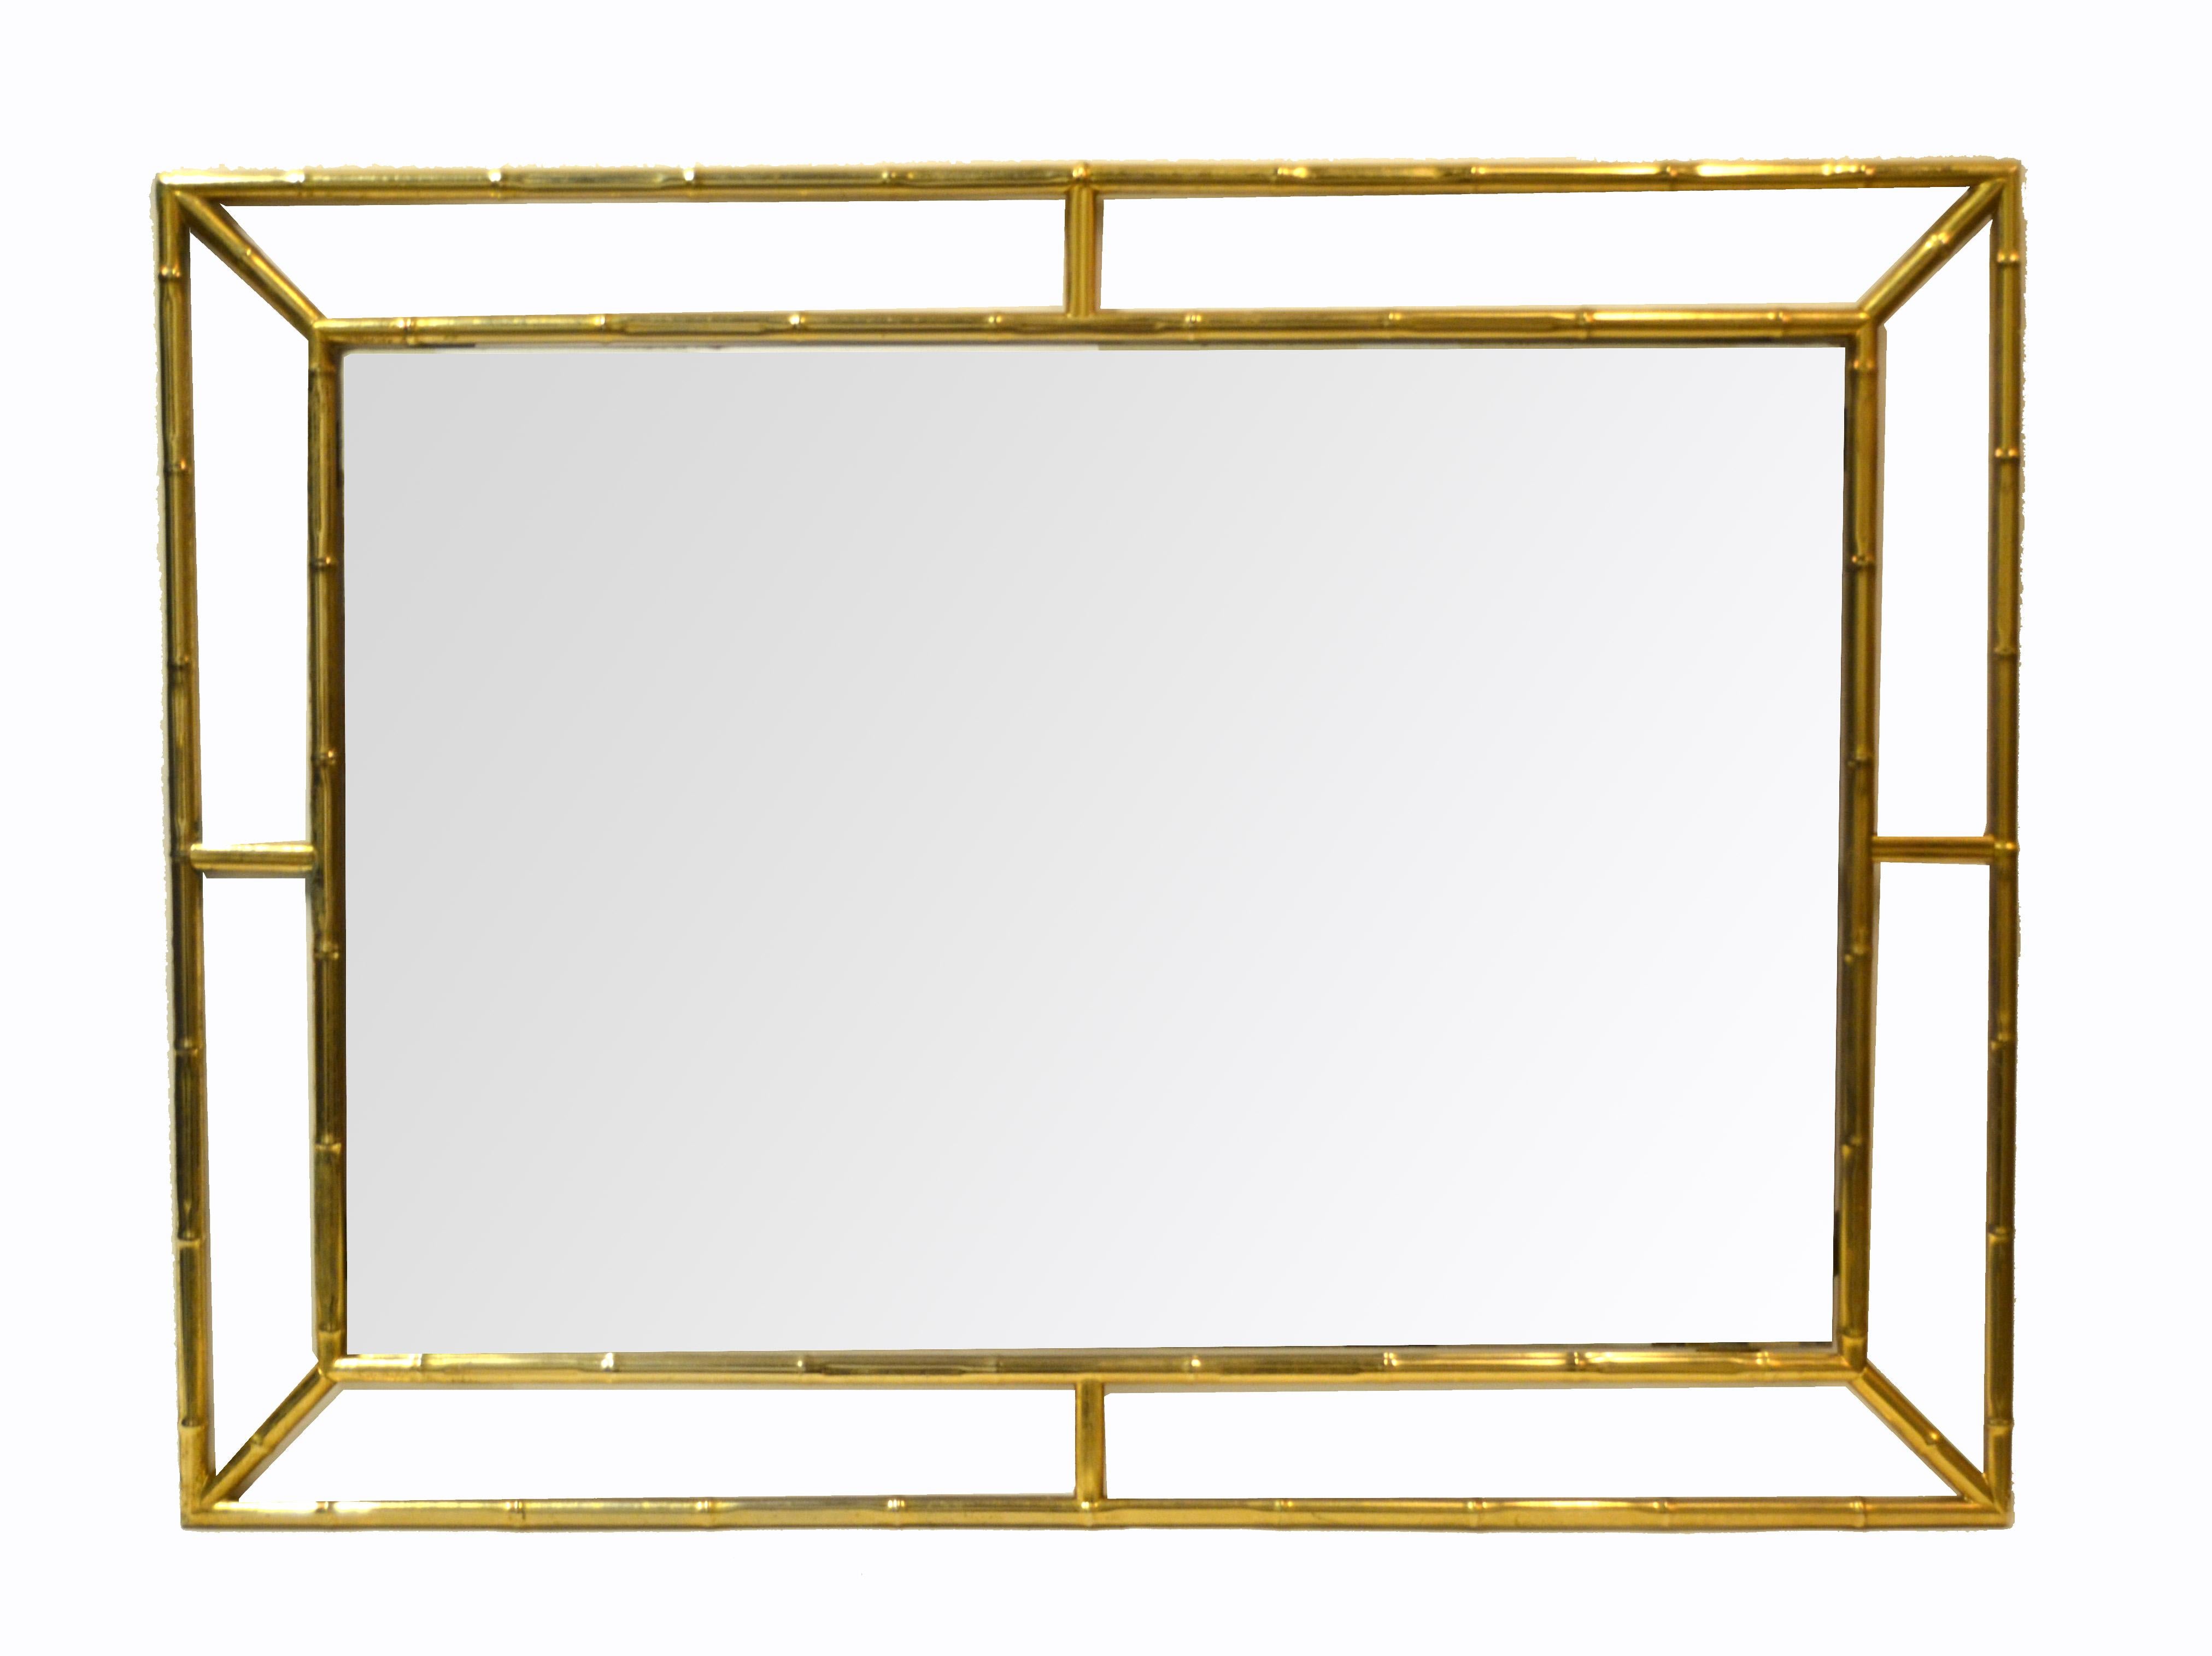 Mid-Century Modern brass faux bamboo wall mirror made in Italy, late 1970s.
Can be hung horizontal.
Light foxing to mirror glass as documented in the pictures.
Mirror size: 21.5 x 32.5 inches.